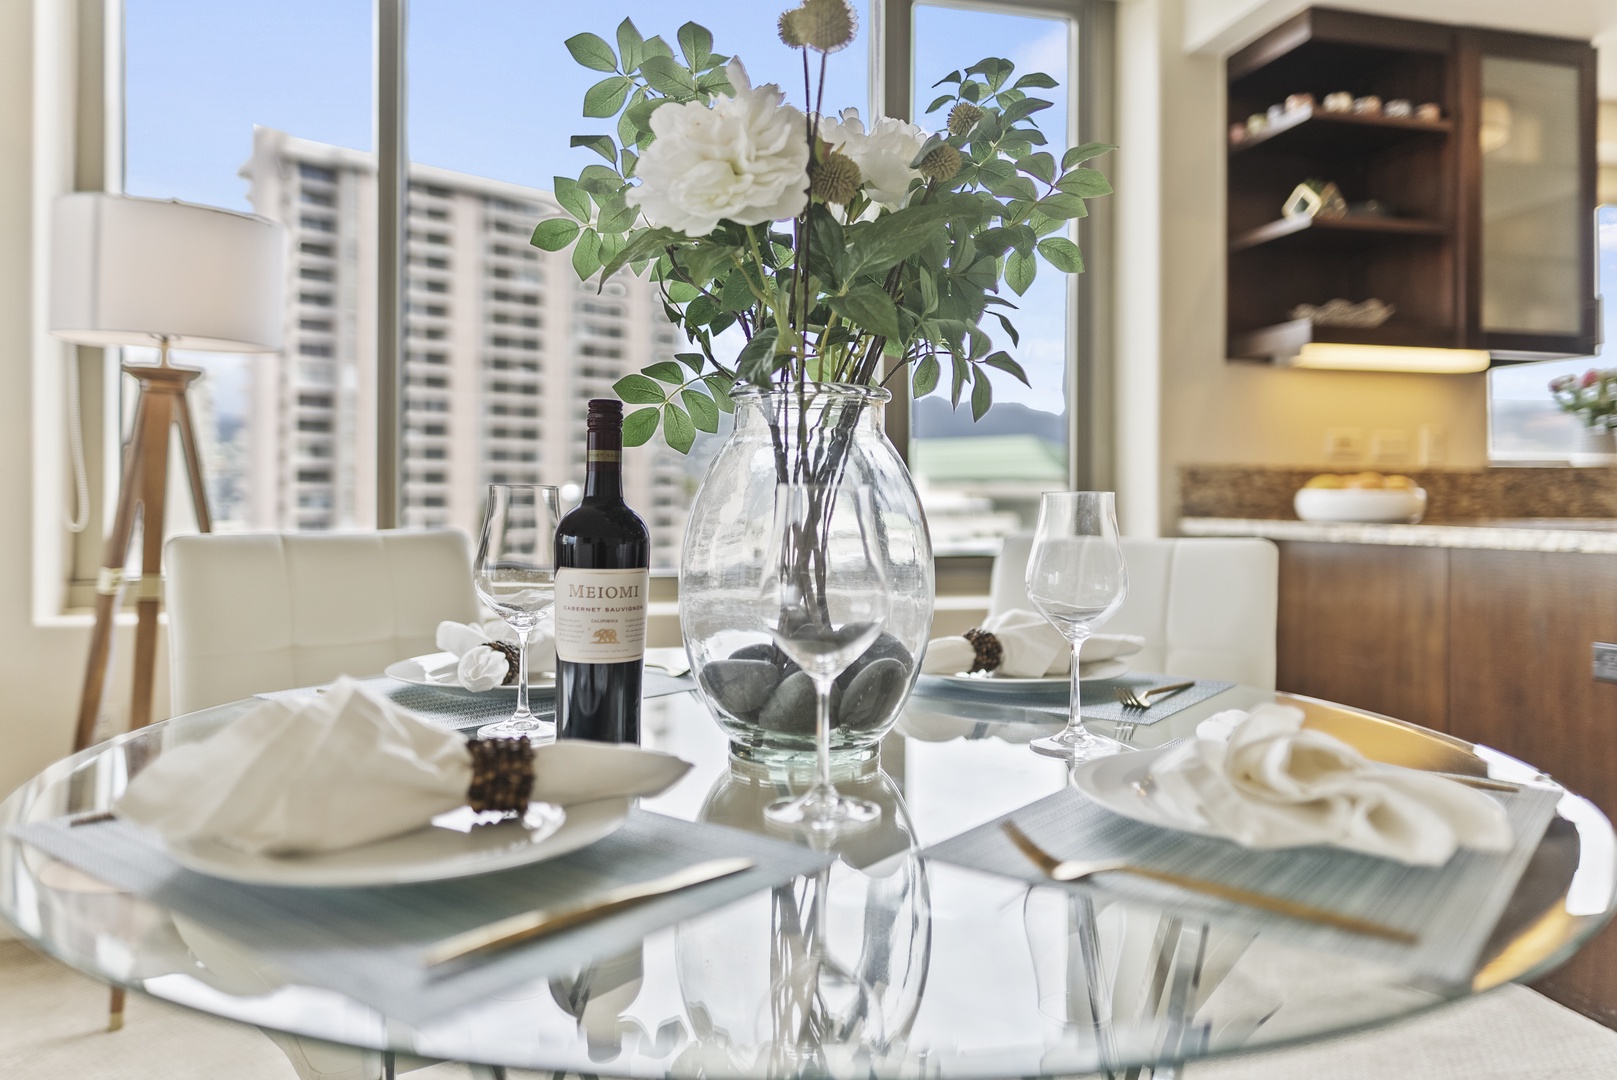 Honolulu Vacation Rentals, Watermark Waikiki Unit 901 - Enjoy intimate dining for four with city views.